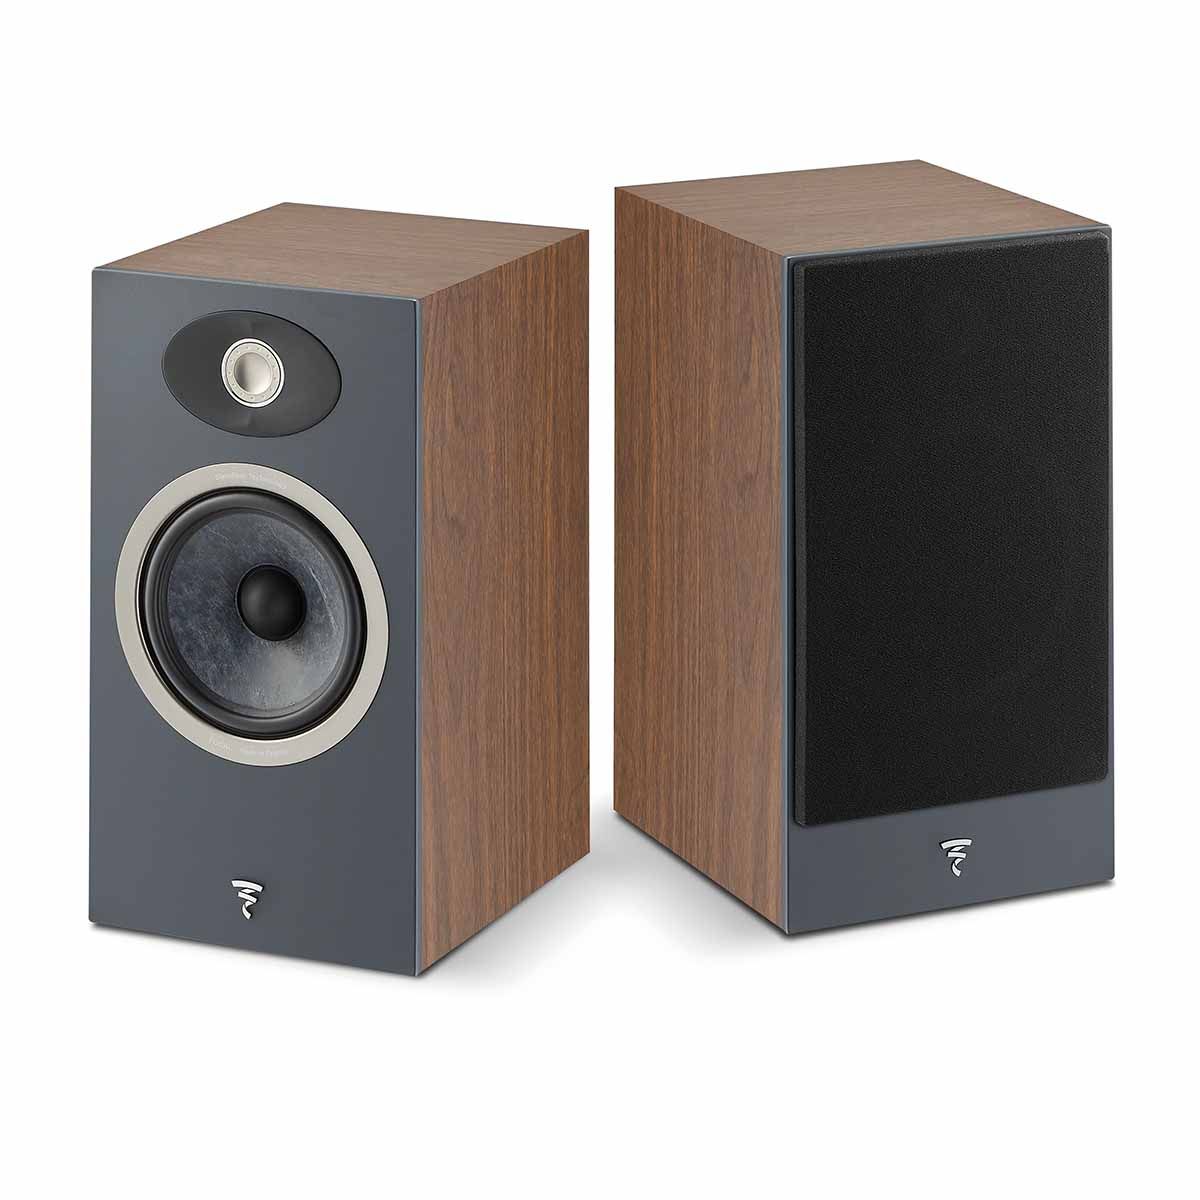 Focal Theva No1 Bookshelf Speakers - Pair - view of dark wood pair, one with grille, one without grille